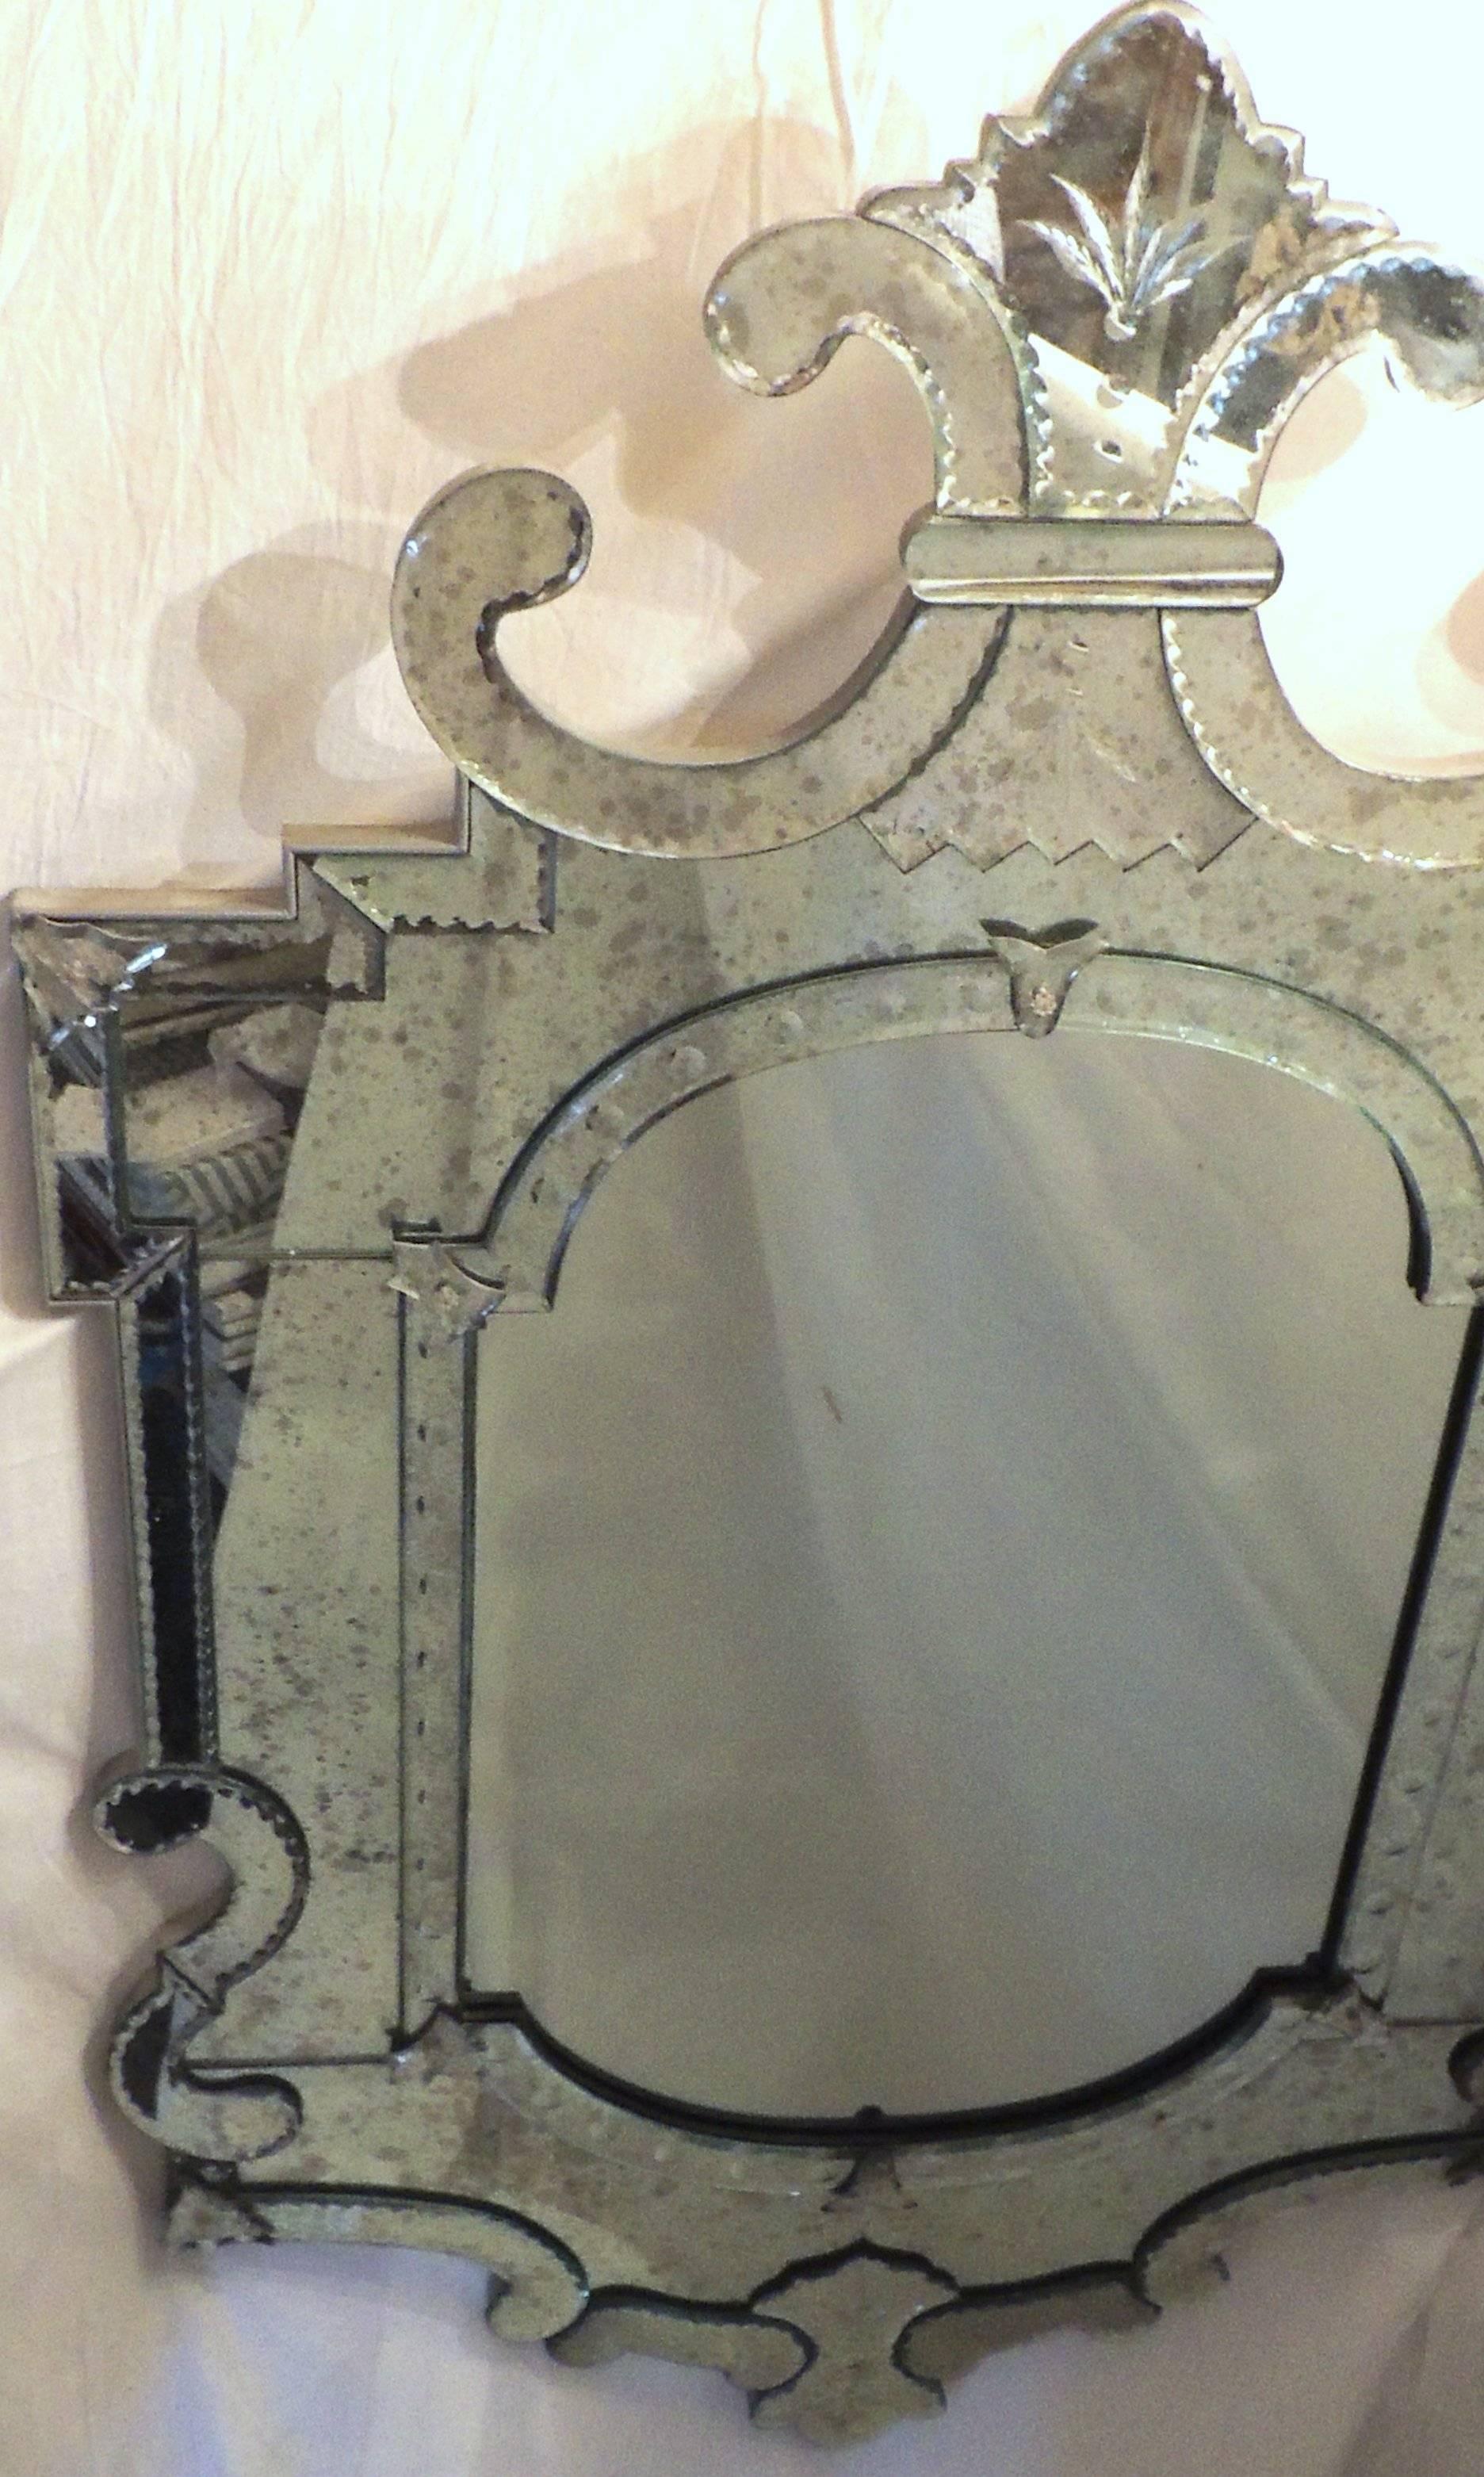 Wonderful large Italian vintage Venetian mirror with scalloped crown etched, appliques and beveled details.

Measures: 37